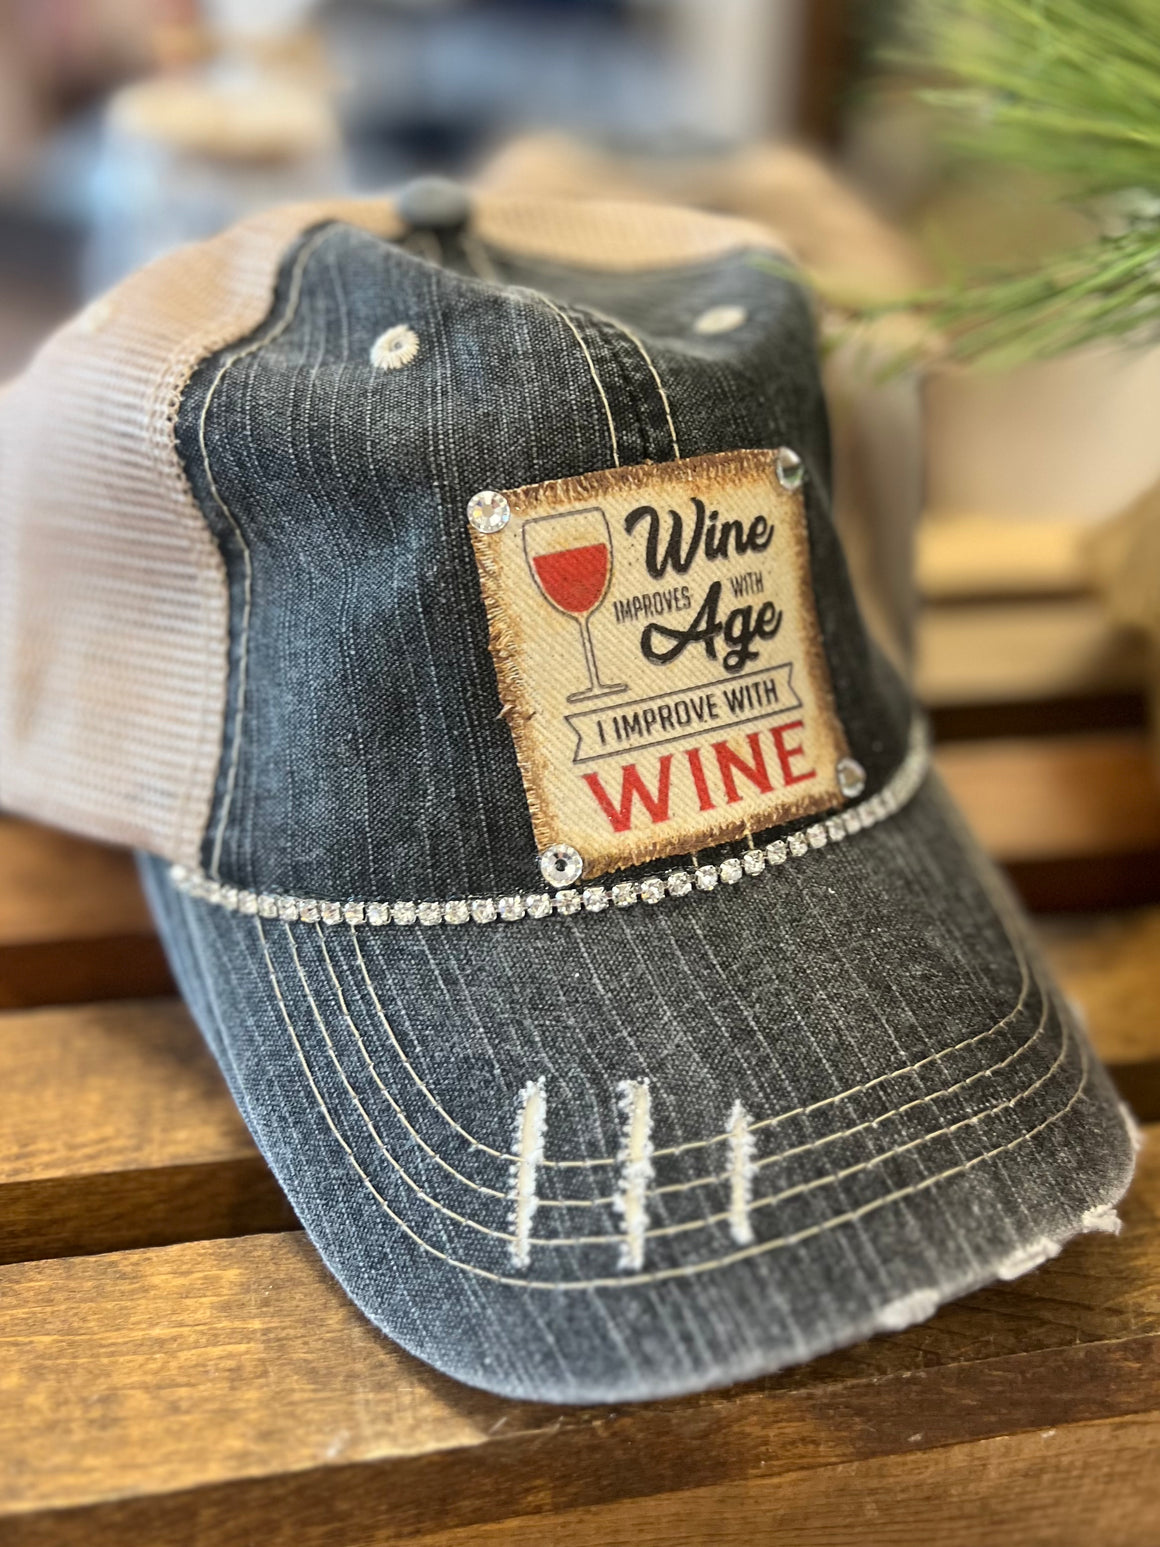 Rhinestone Distressed Trucker Hat - Wine Improves with Age, I Improve with Wine